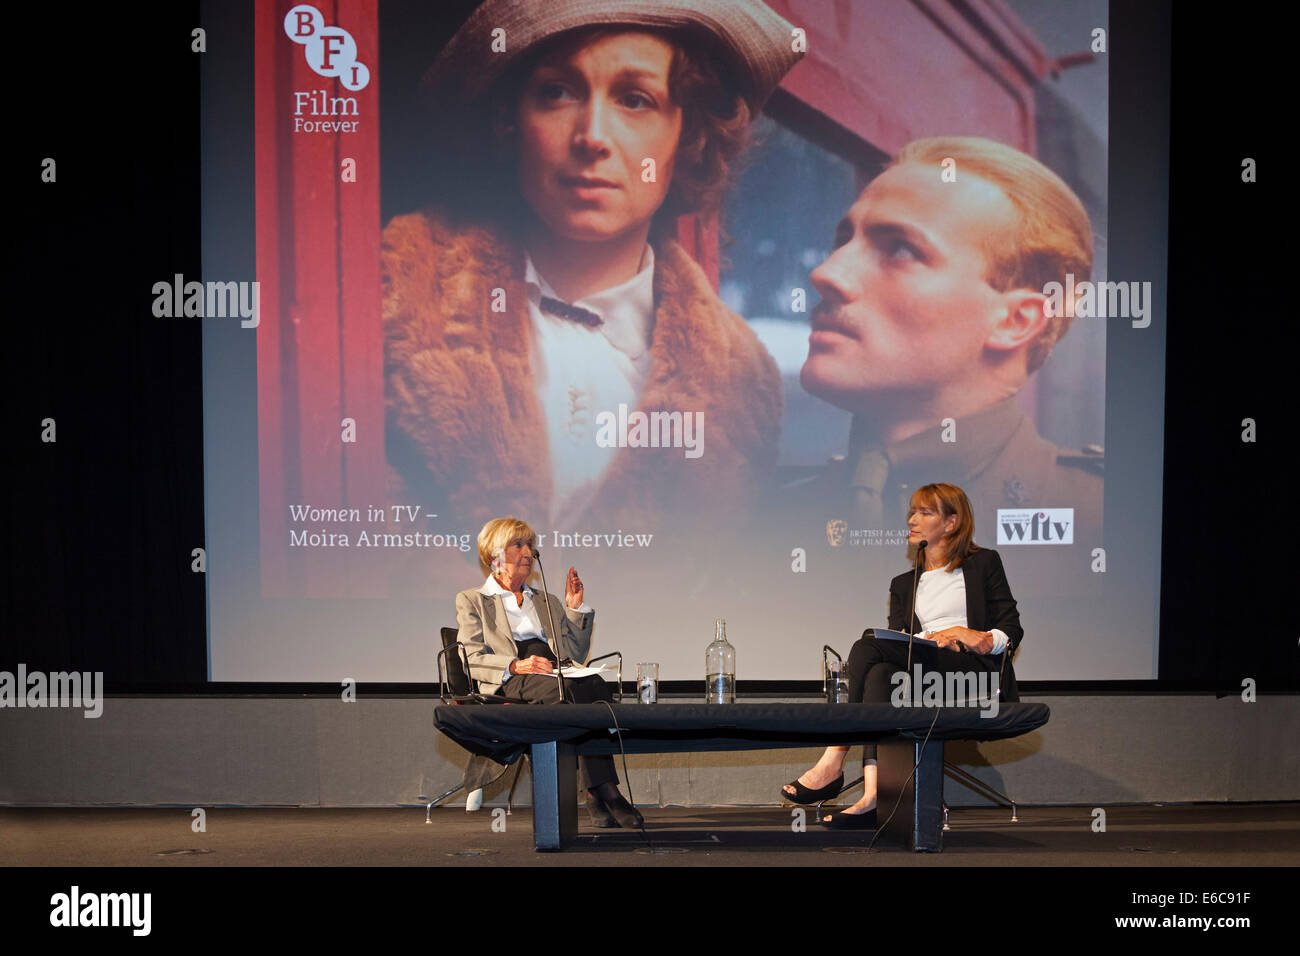 London, England, UK, 19 August 2014. Legendary BAFTA-Award winning multi-camera television drama director Moira Armstrong (L) being interviewed by Francine Stock (R) at an event in Miss Armstrong's honour organised by the British Film Institute (BFI) in association with BAFTA and Women in Film & Television (WFTV). The background slide is a still from Moira Armstrong’s 1979 BBC production ‘Testament of Youth’, an adaptation of Vera Brittain’s classic memoir about the impact of World War I. Credit:  John Henshall / Alamy Live News PER0421 Stock Photo